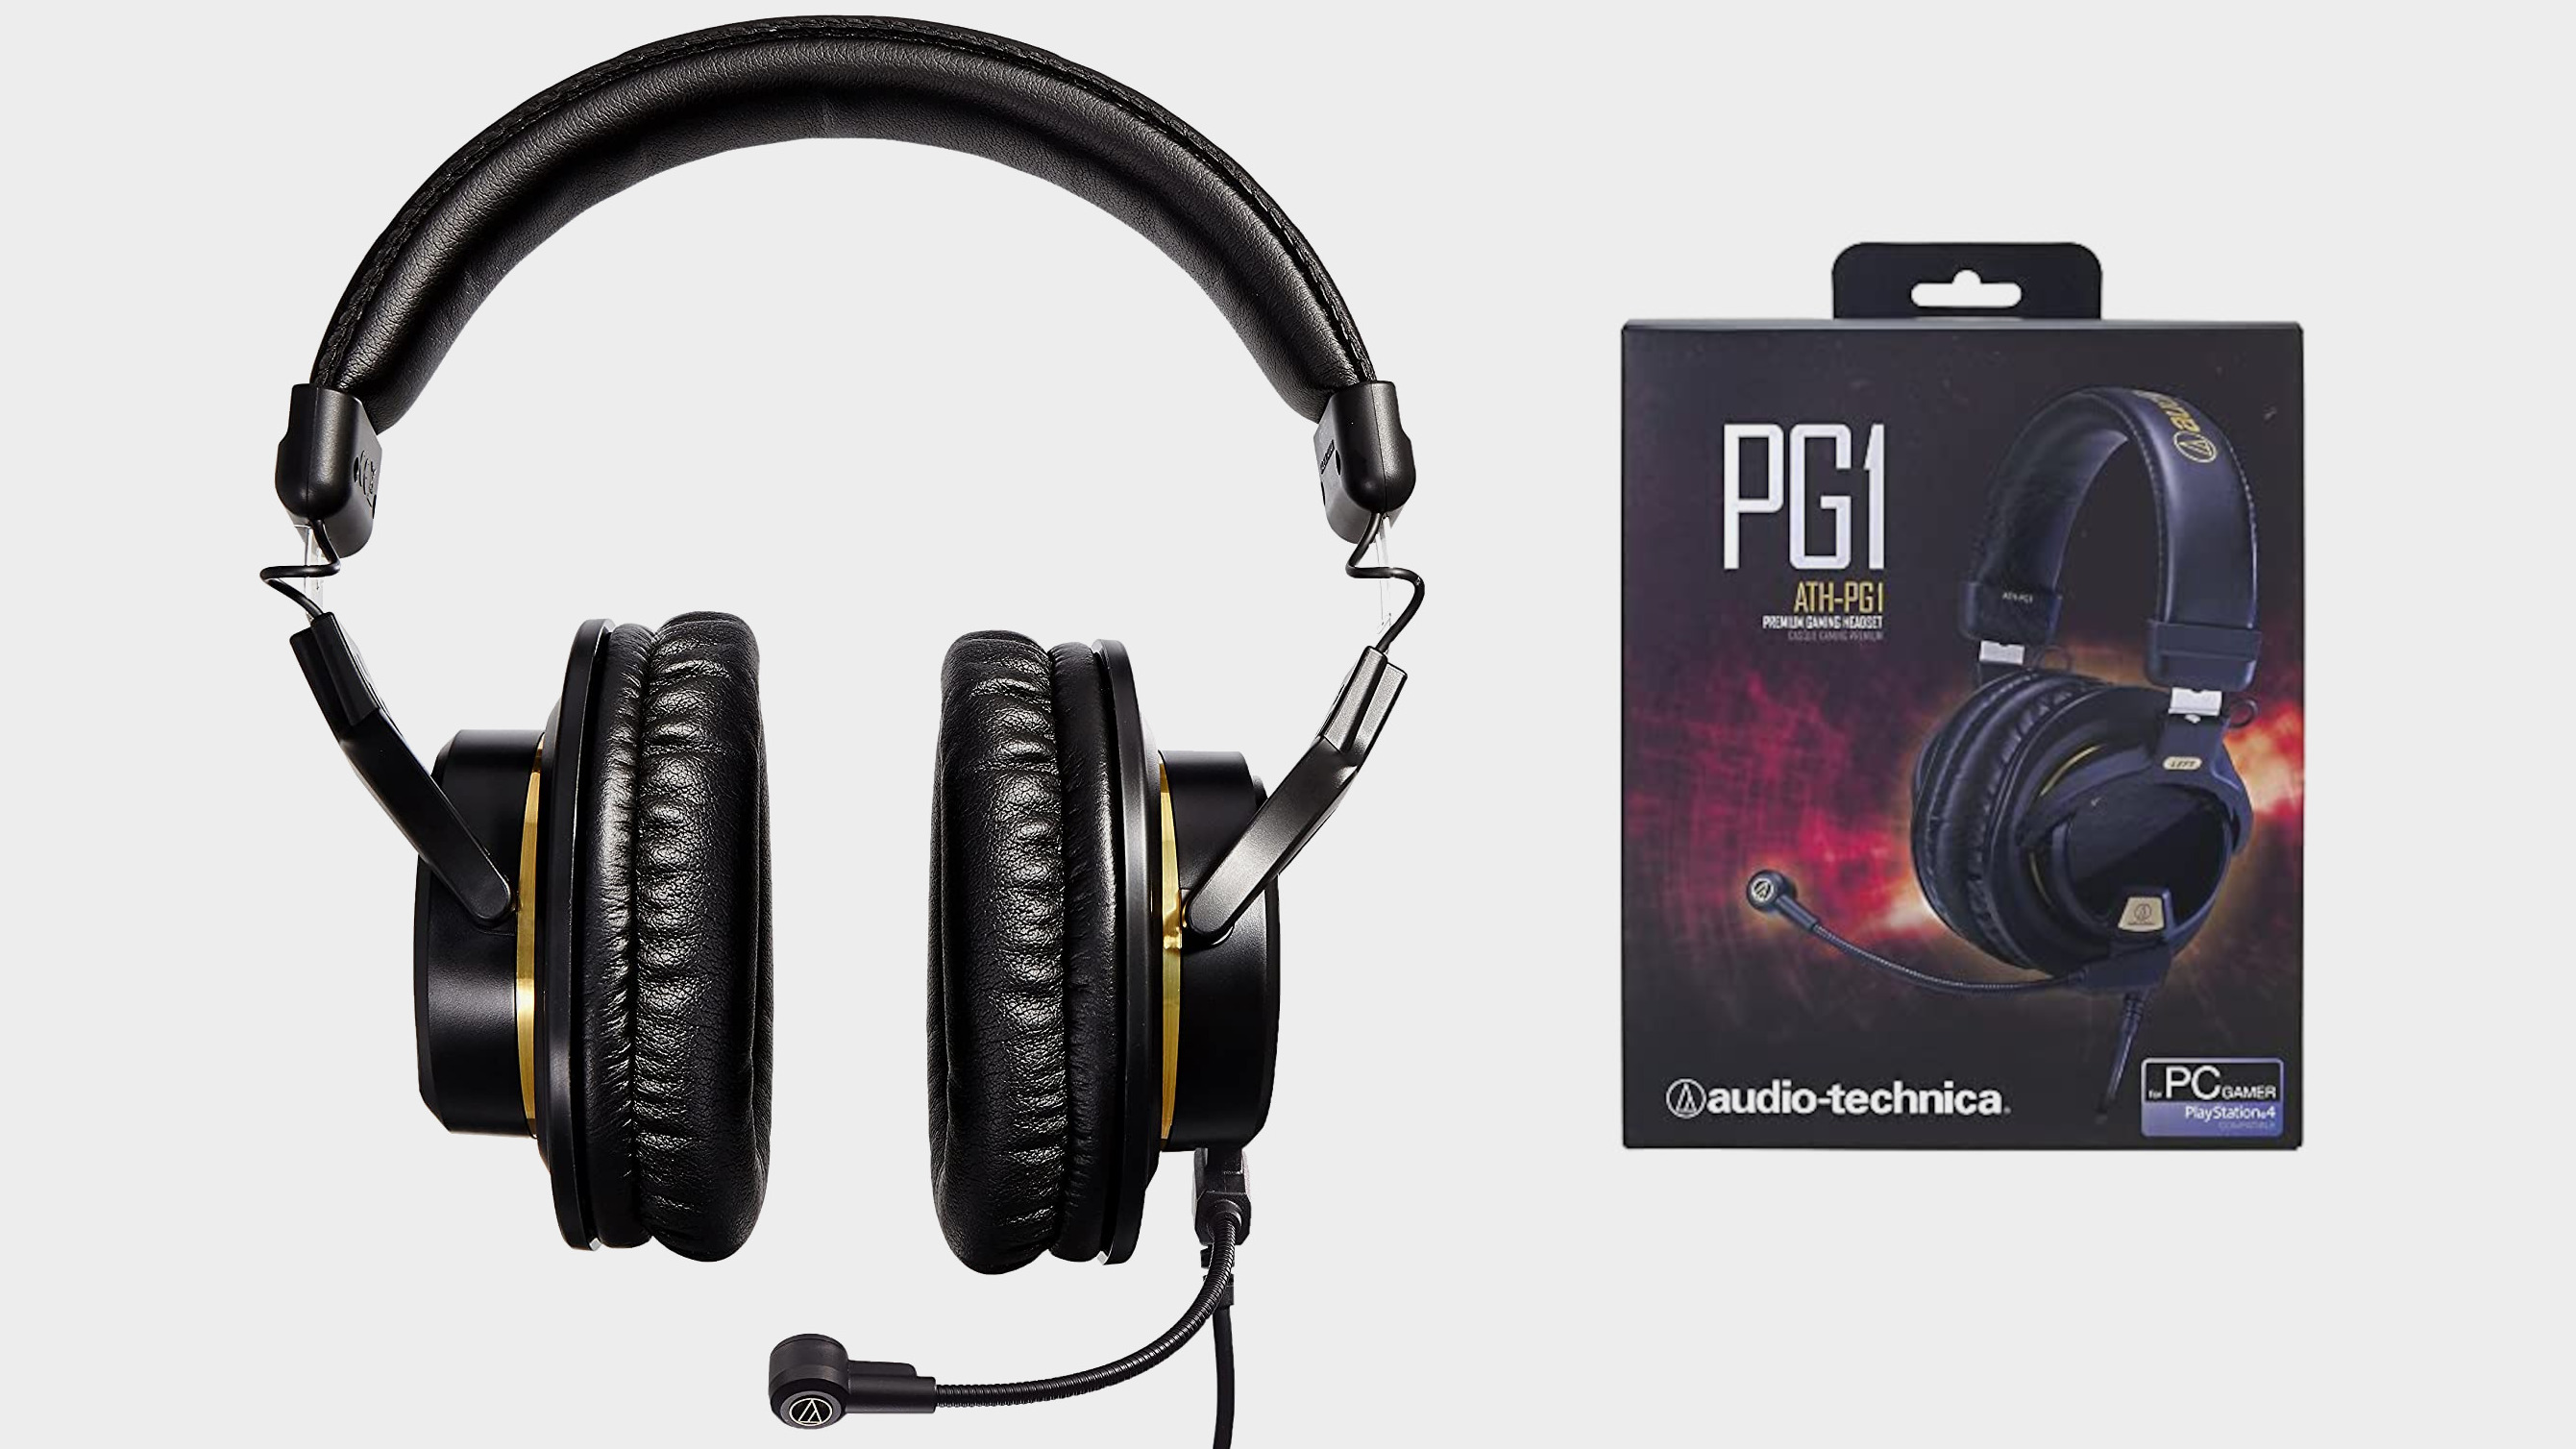 Gaming headset deal: Audio-Technica's ATH-PG1 is down to $80 right